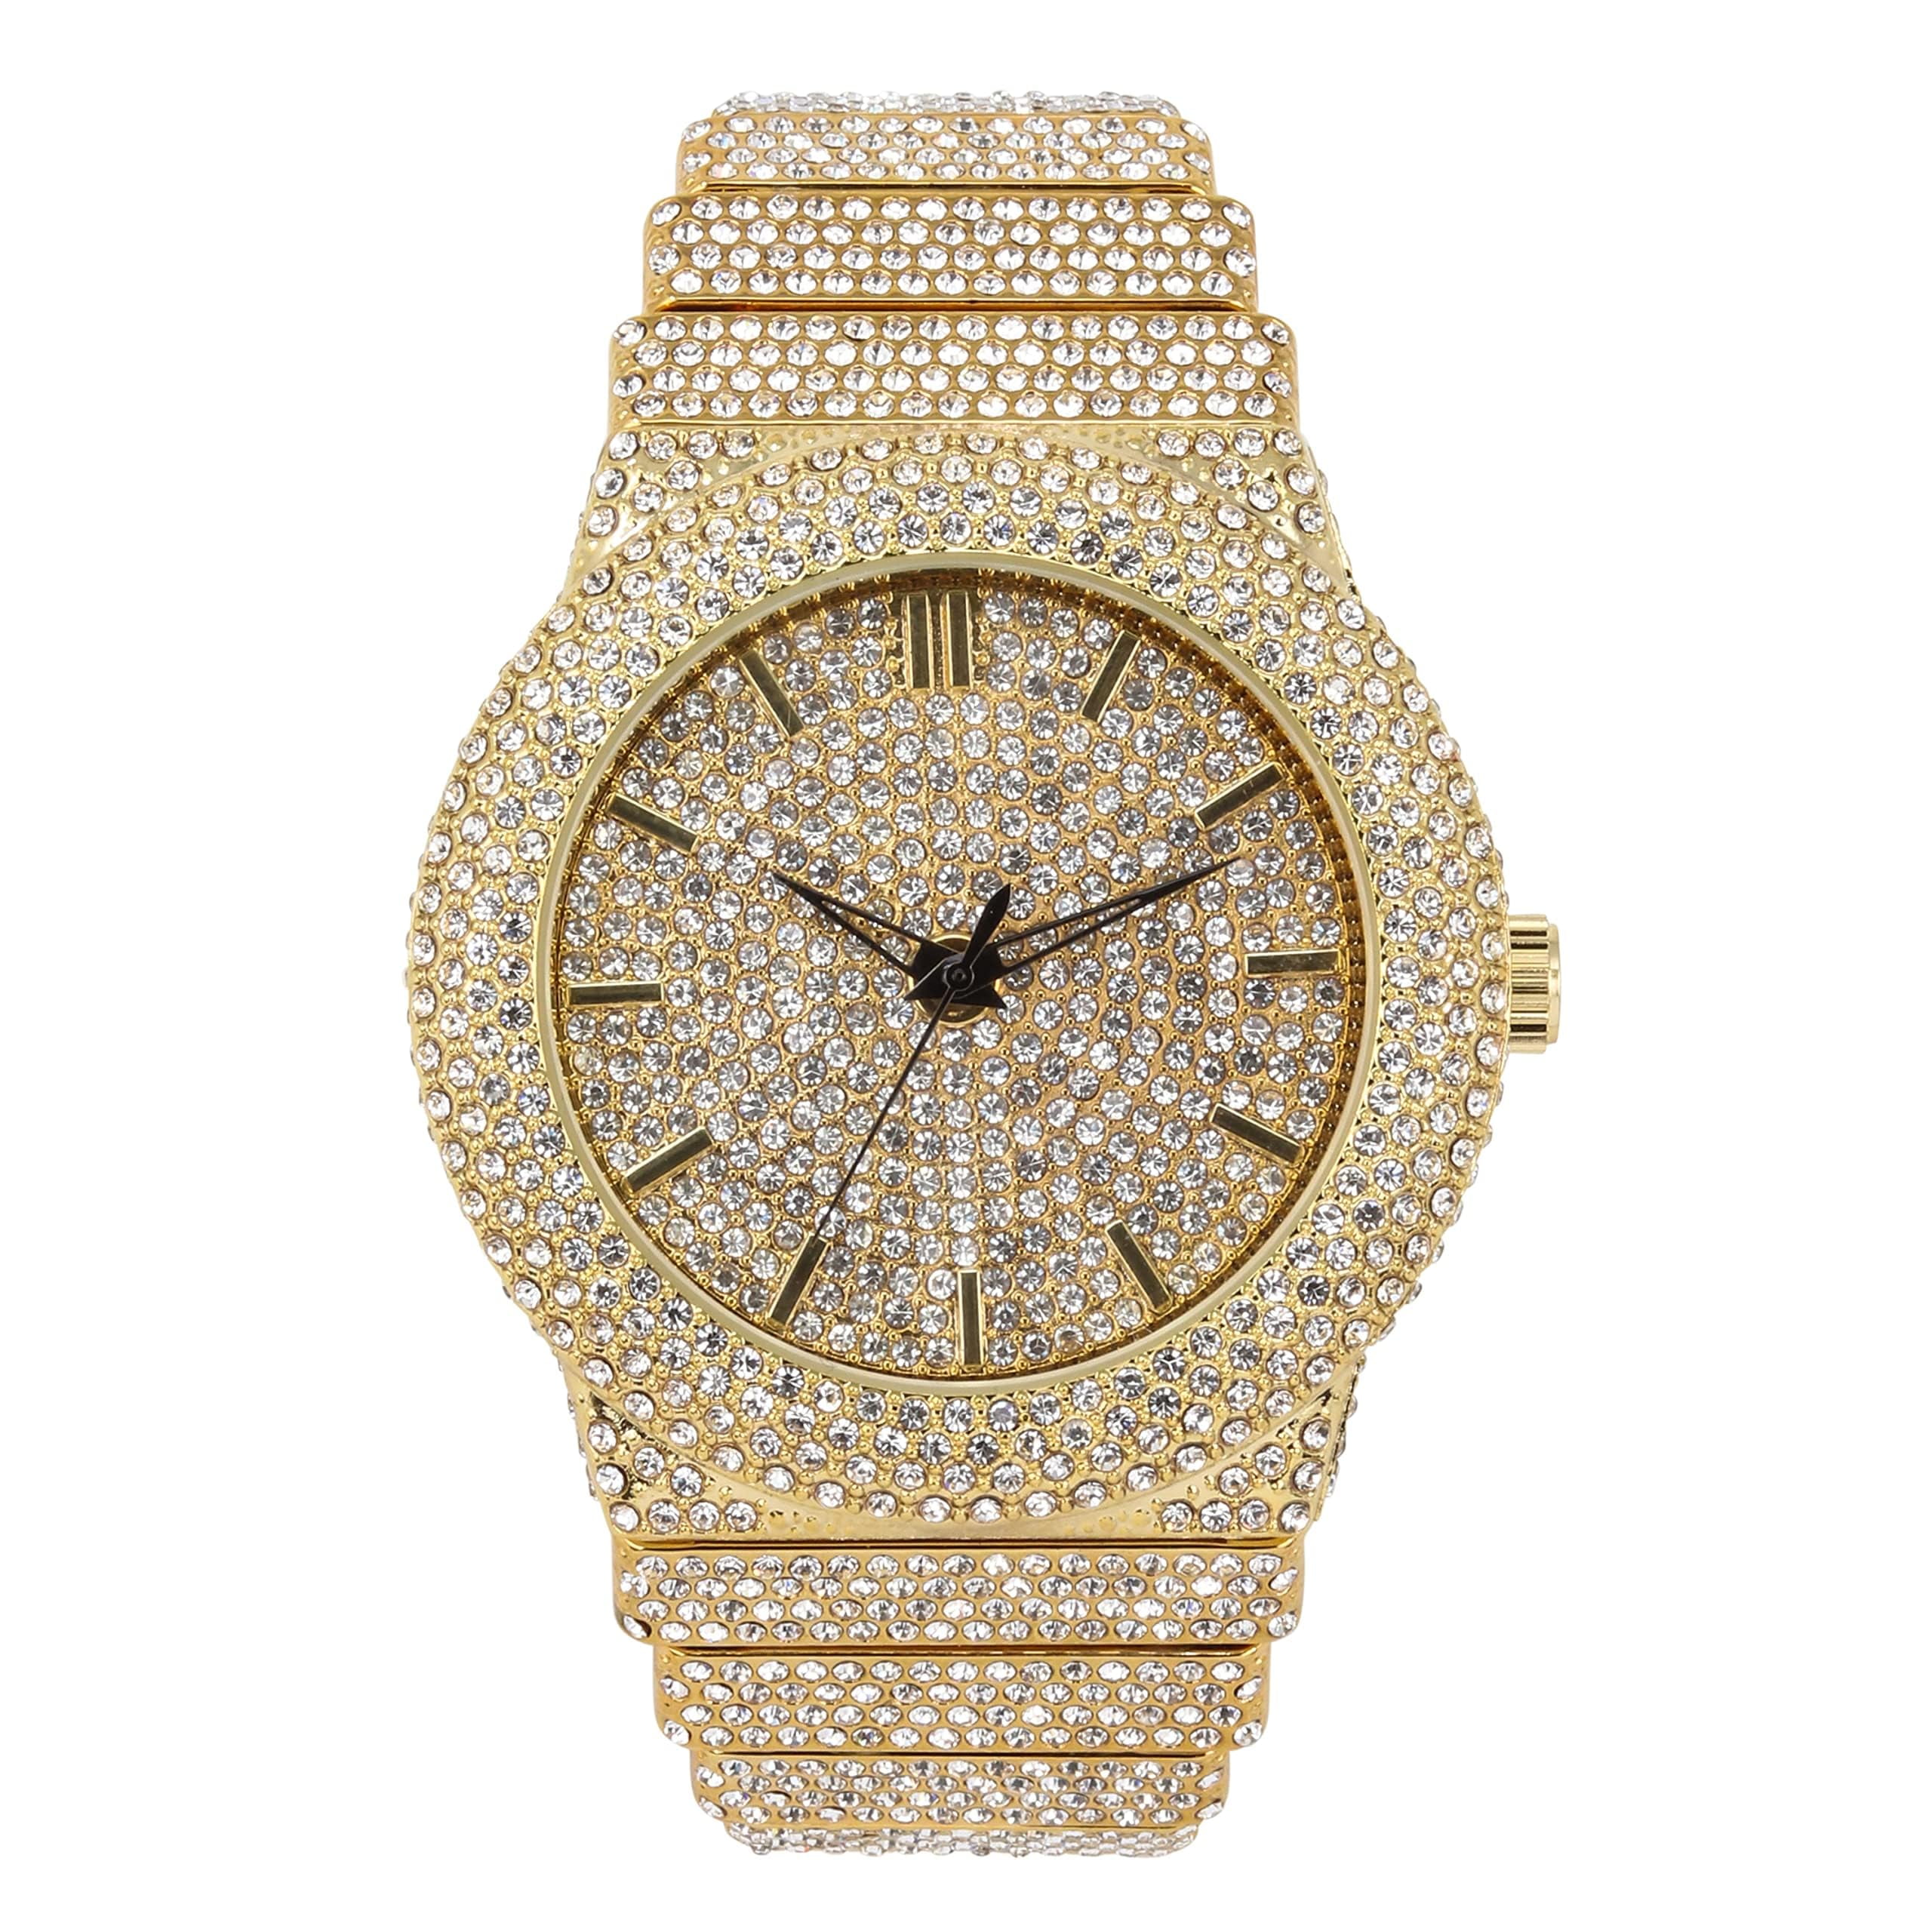 Men's Round Iced Out Diamond Watch - Brilliant Crystals, Bling Dial, Iced  Bezel - Fully Iced Out Band with Adjustable Sizing - 14k Gold Finish 